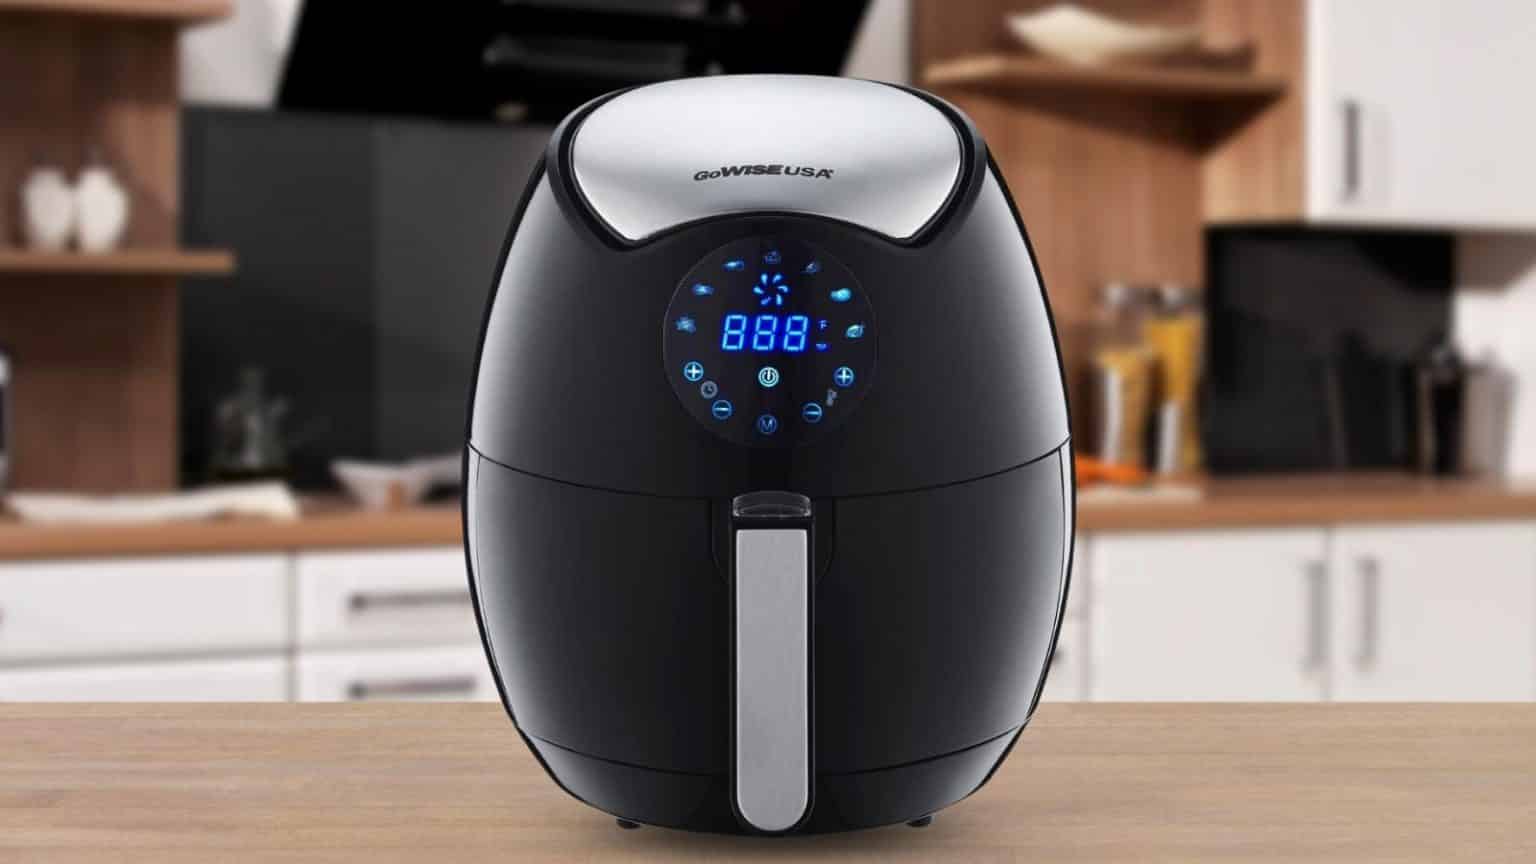 4 Common GoWISE Air Fryer Problems (Troubleshooting) - Miss Vickie